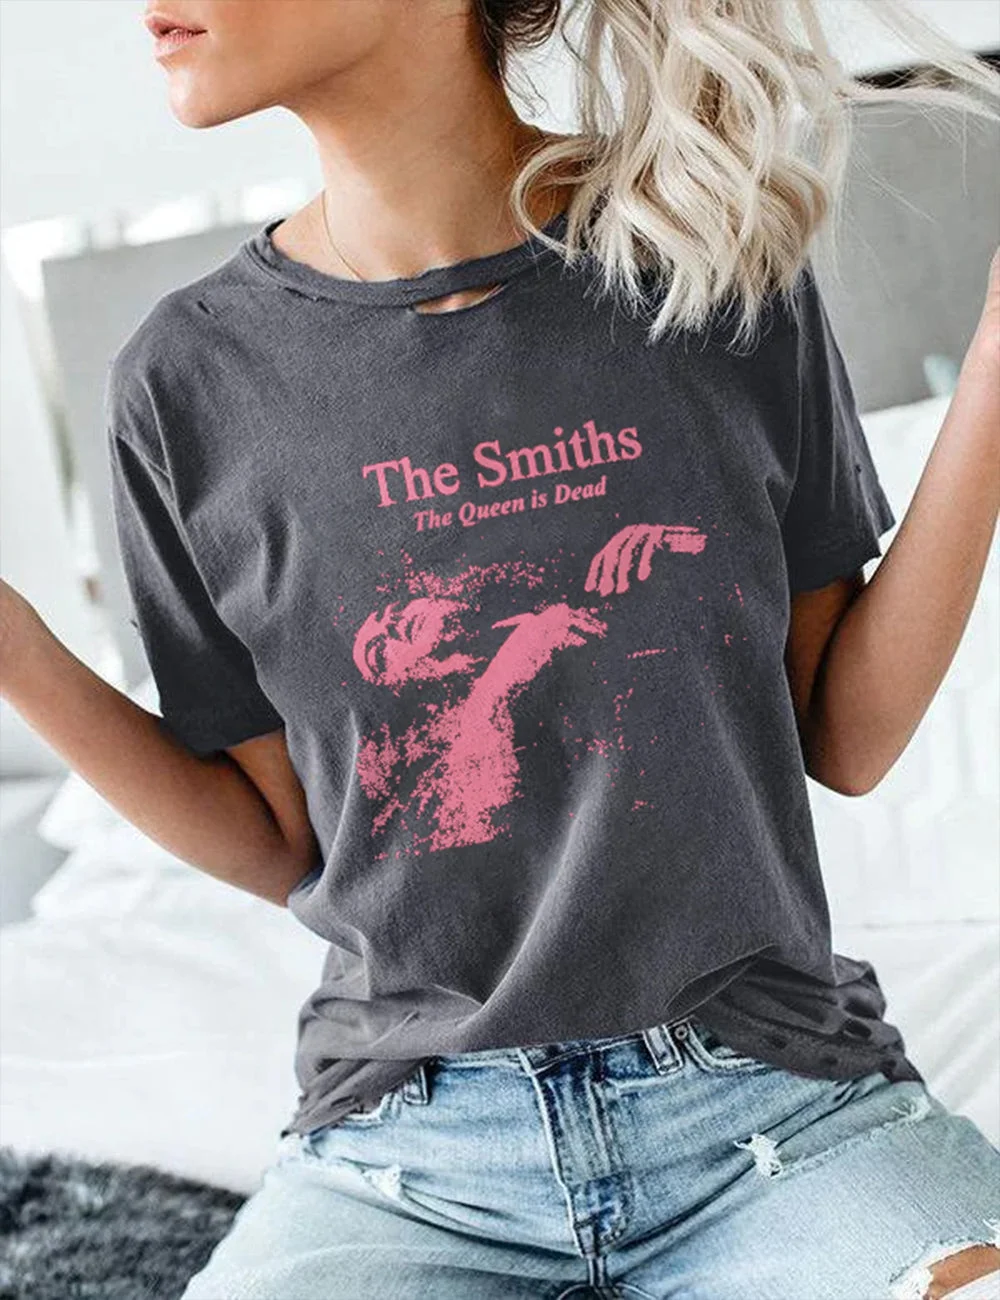 The Smiths The Queen is Dead Tee